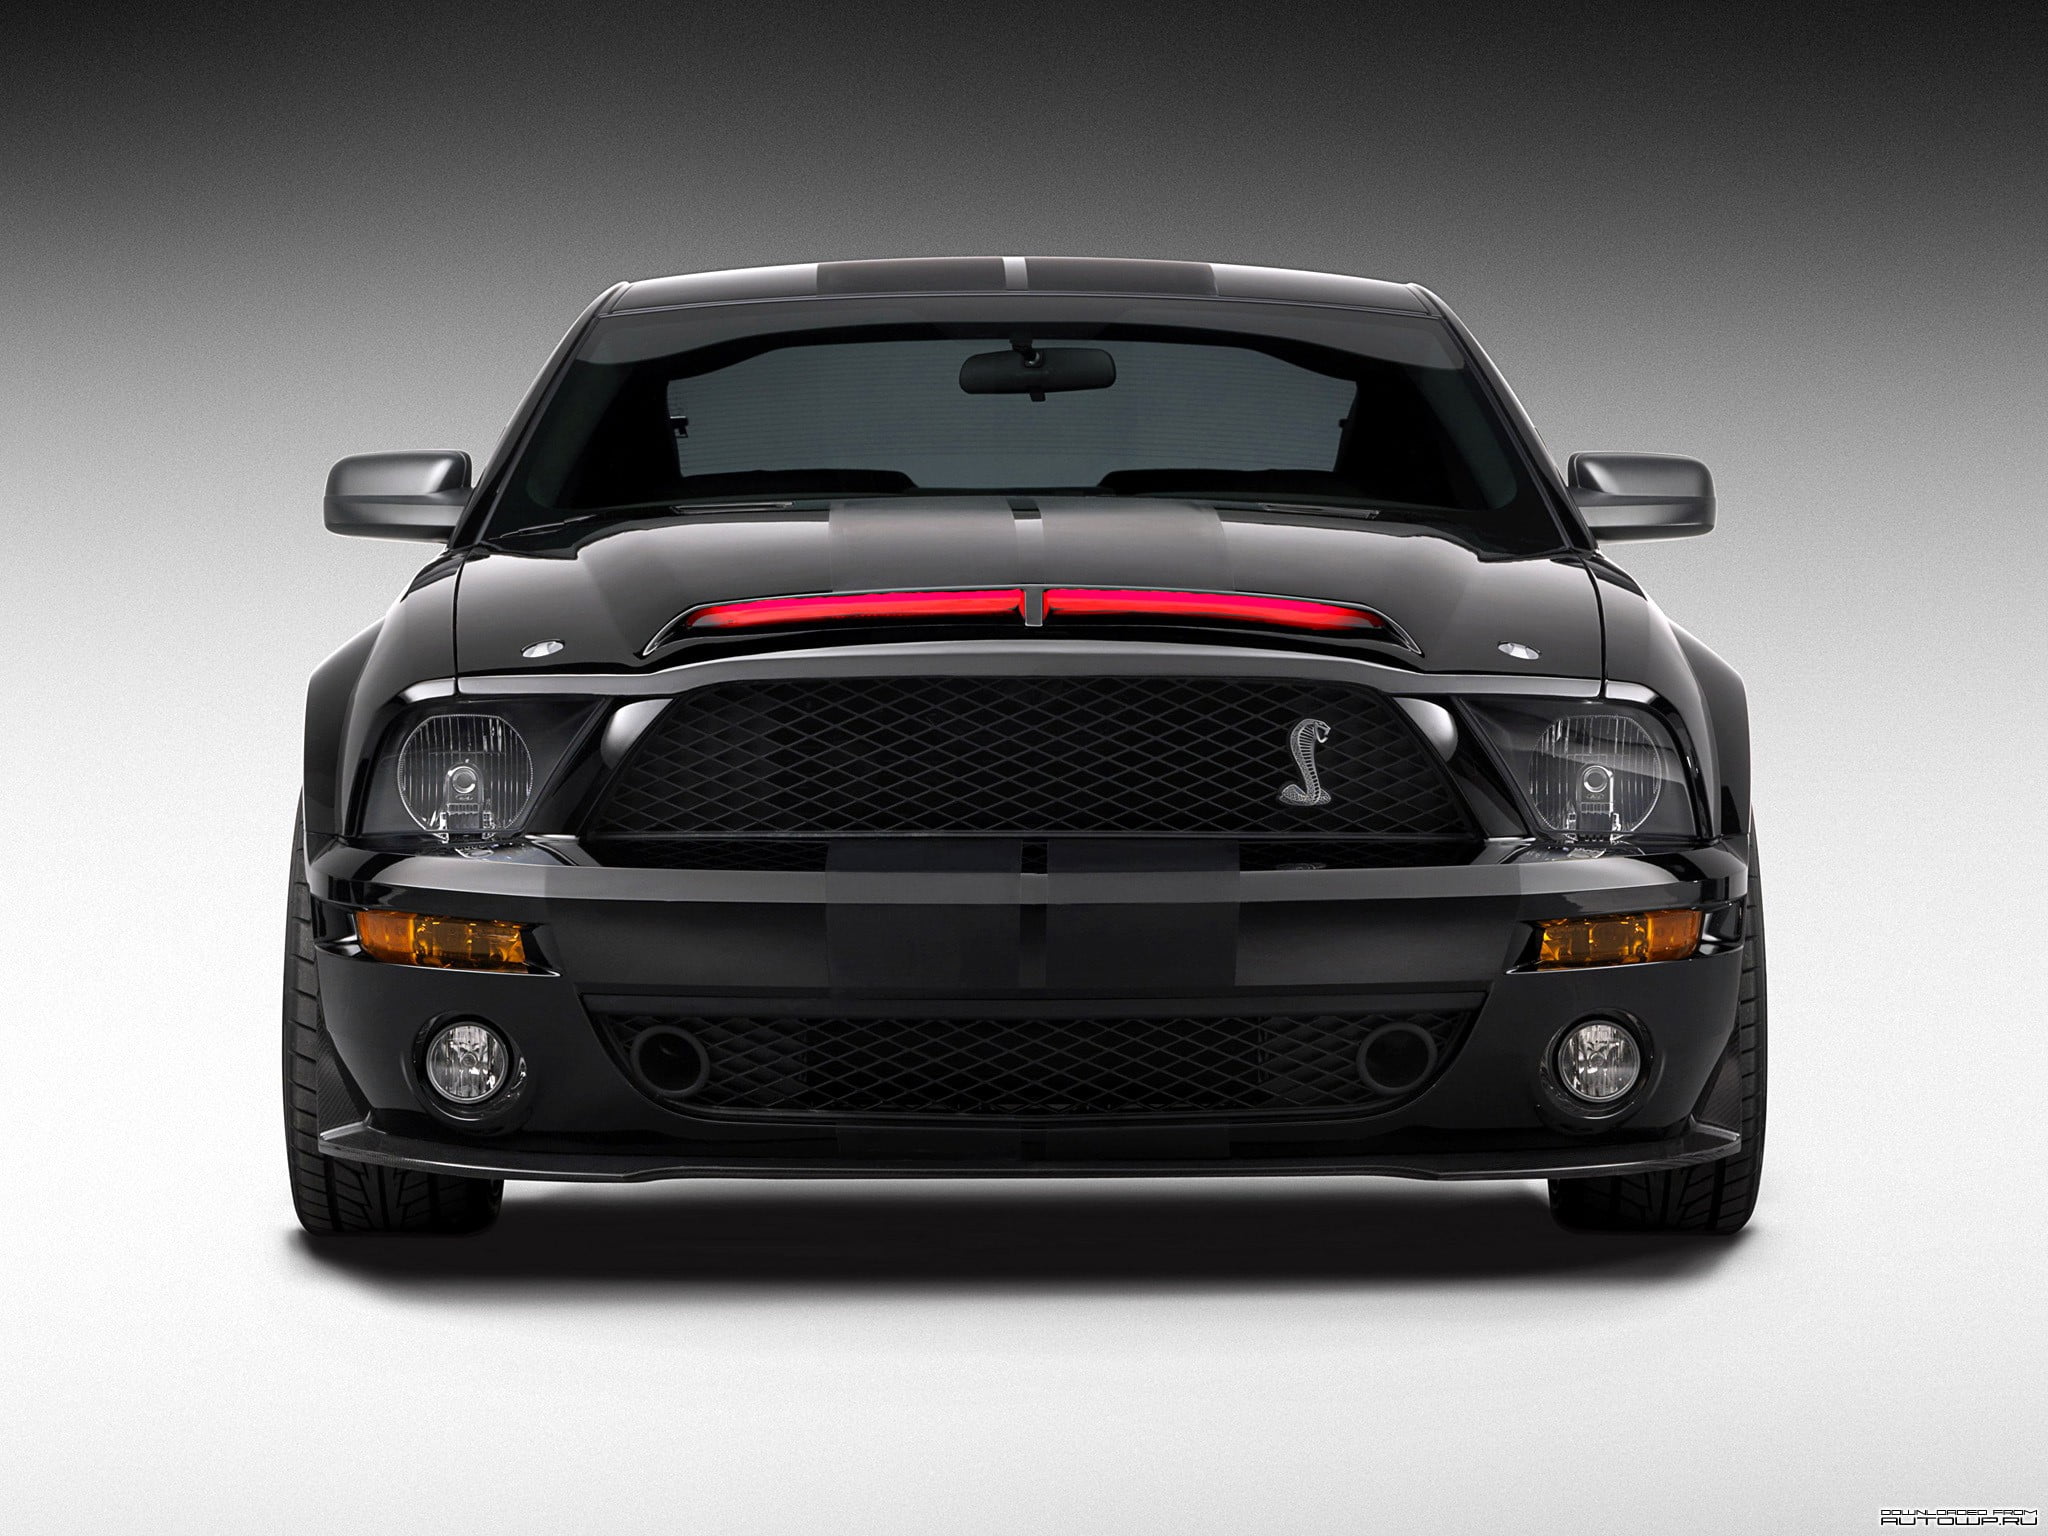 Black Ford Mustang Coupe Ford Mustang Knight Rider Hd Wallpaper Wallpaper Flare